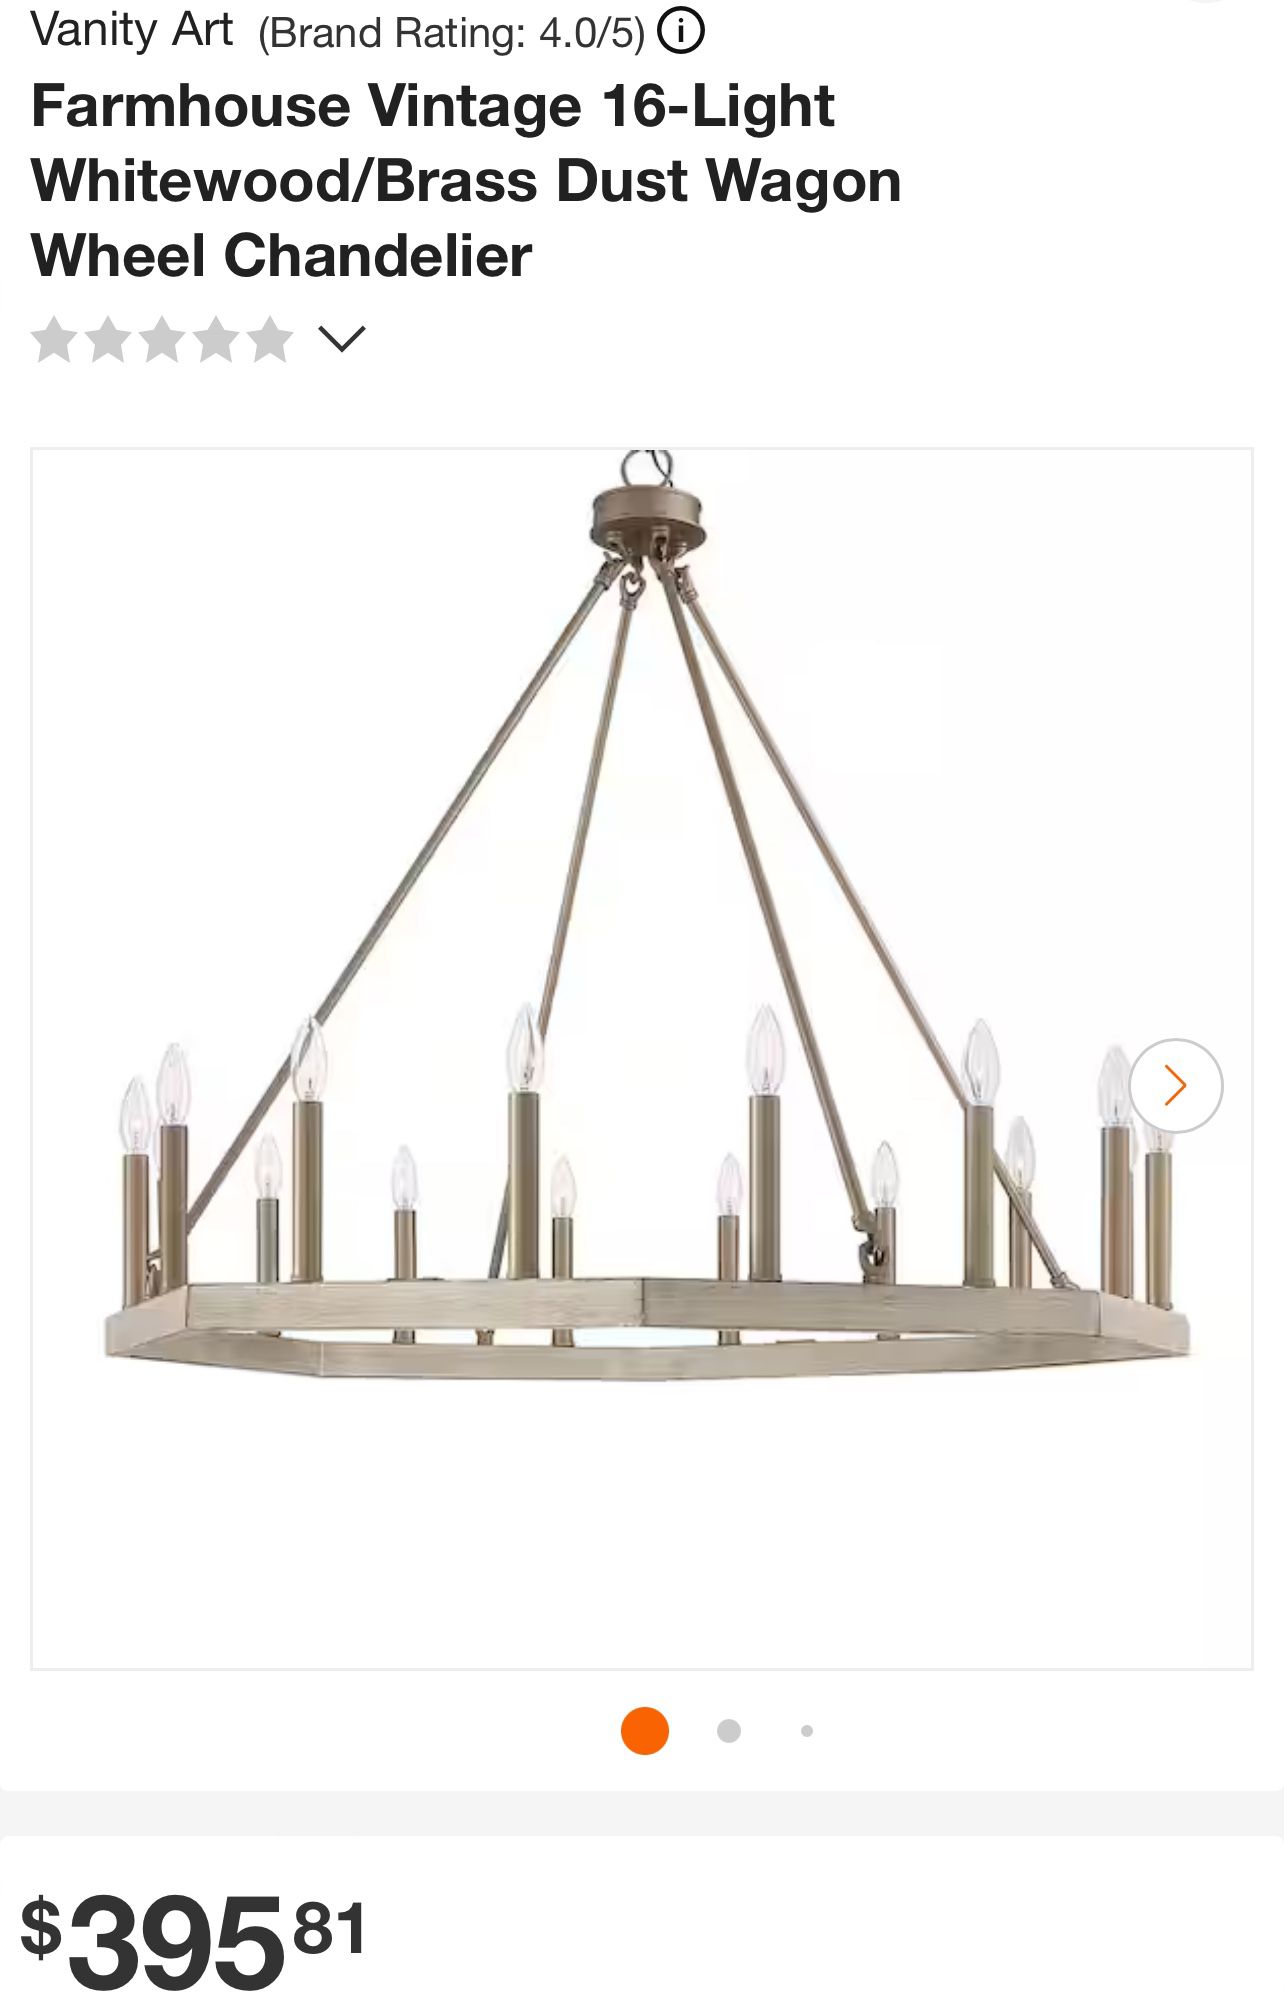 16-Light Farmhouse Vintage Chandelier.  The exclusive white wood and brass dust finish embellish the metalwork, delivering subtle sophistication.  See